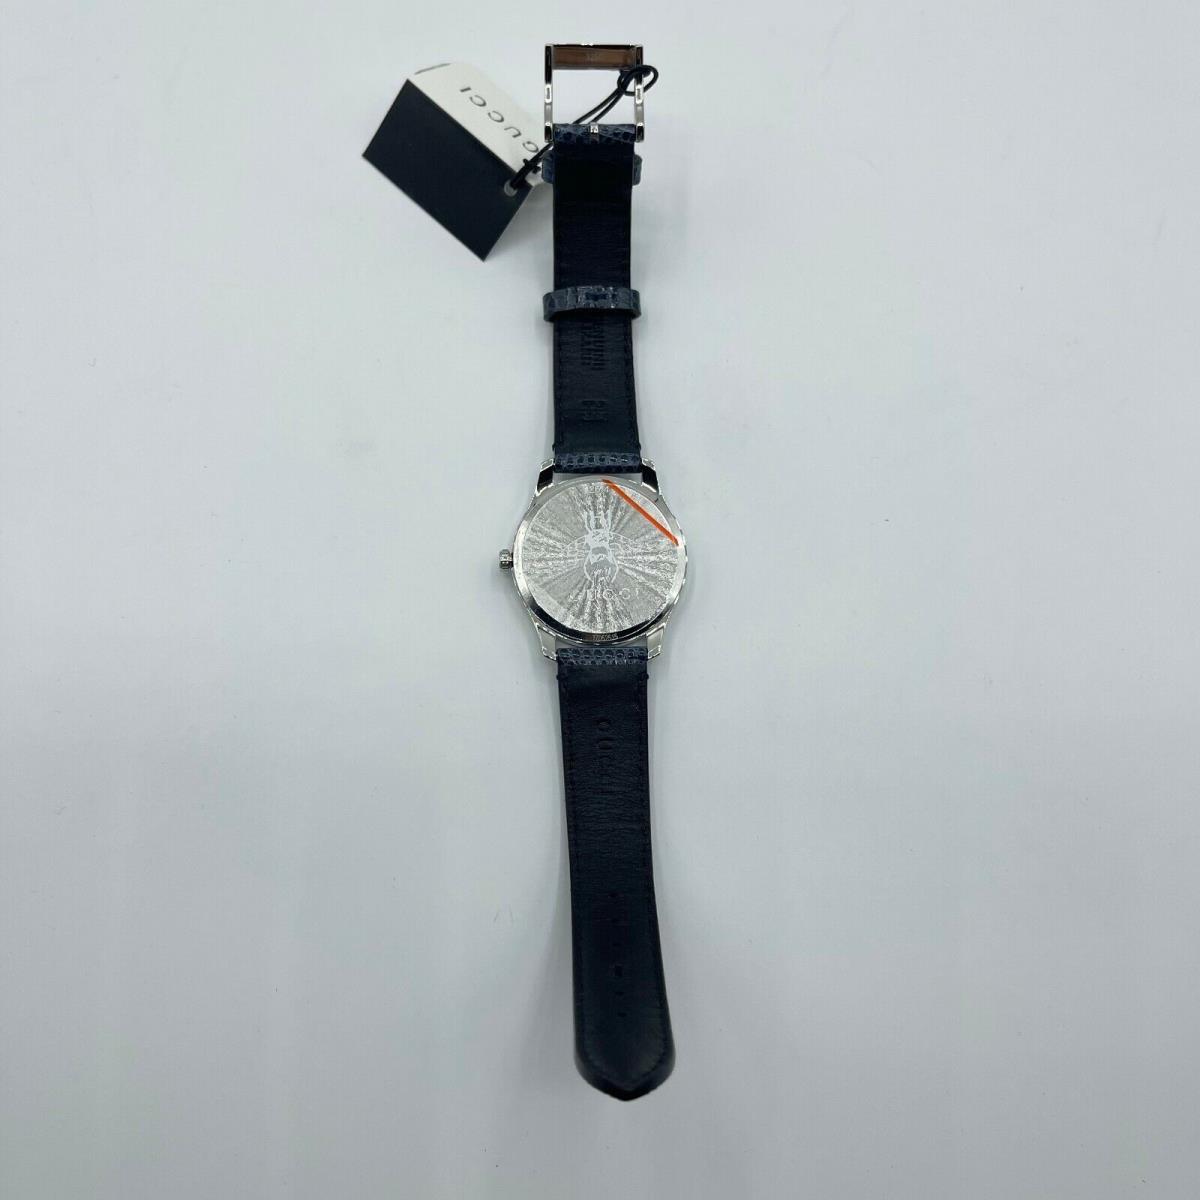 Gucci watch  - Mother of Pearl Dial, Black Band, Stainless Steel Bezel